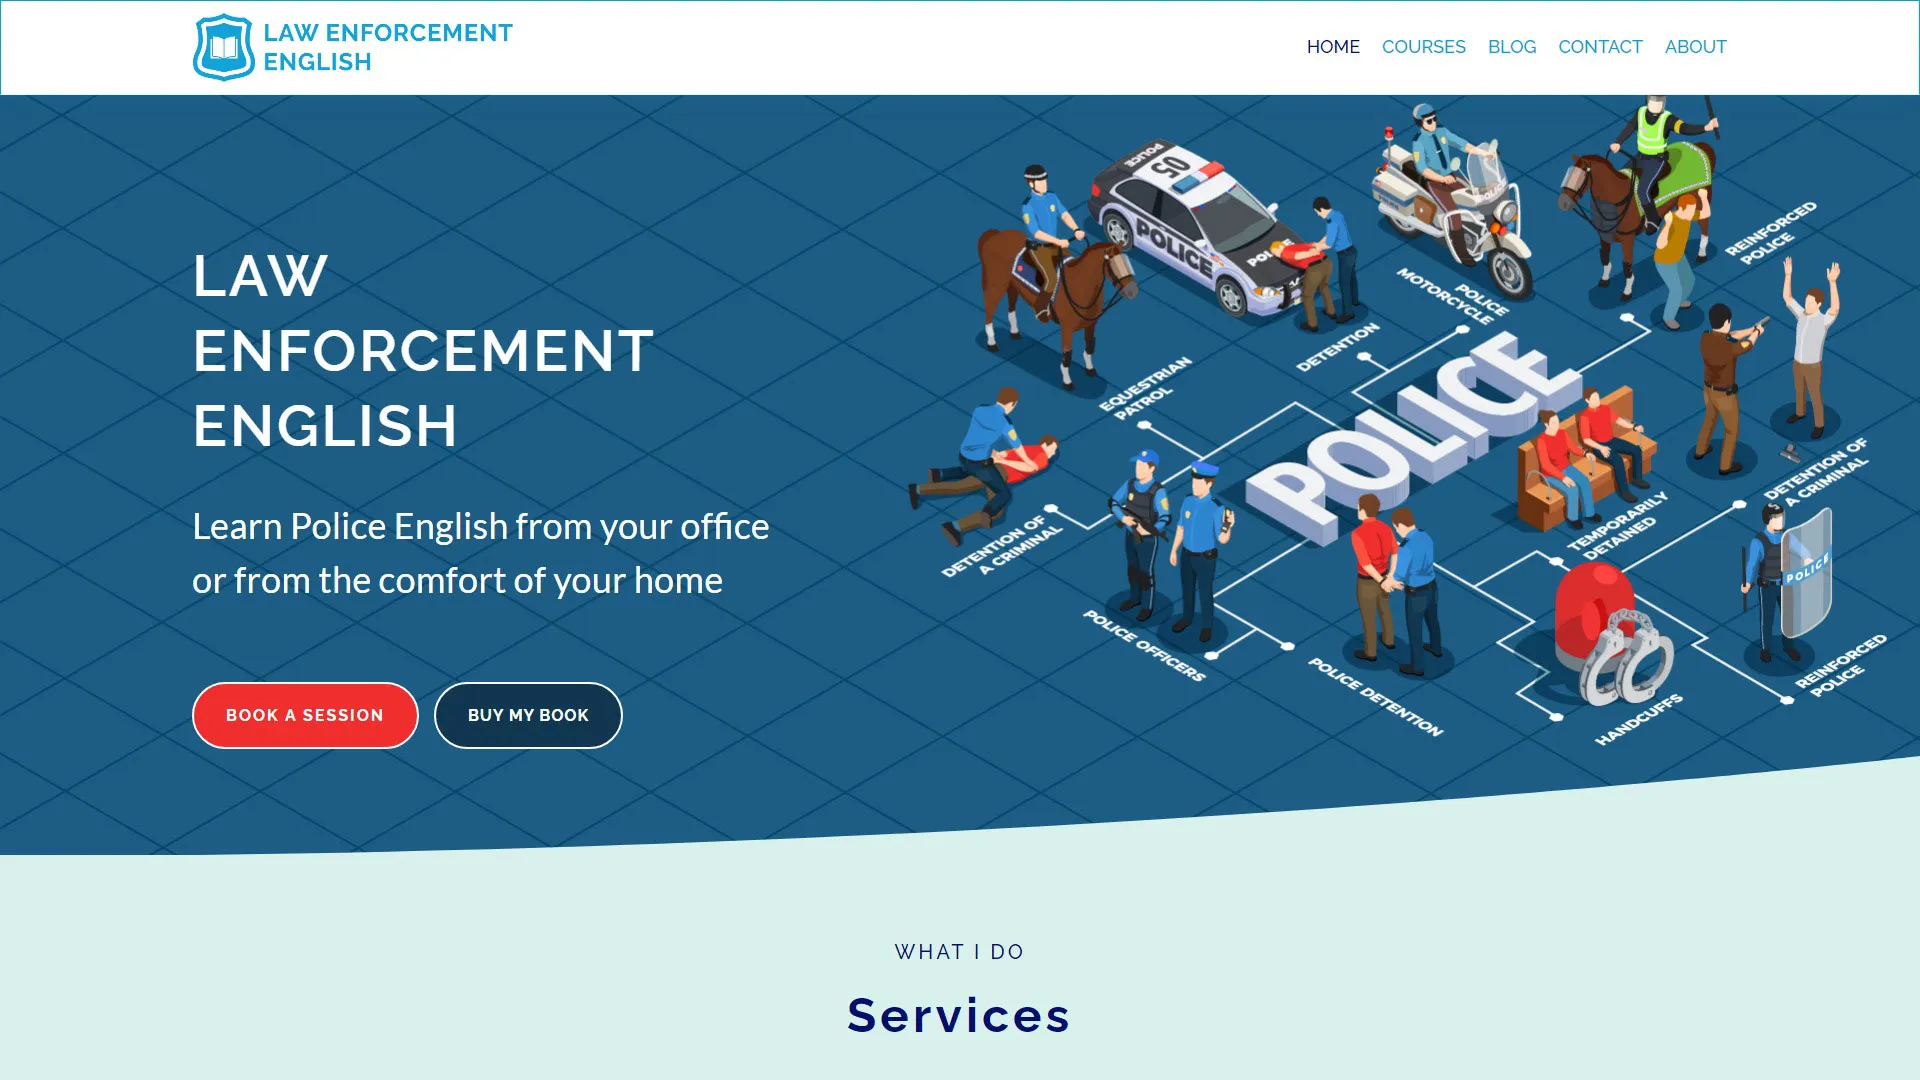 Law Enforcement English home page